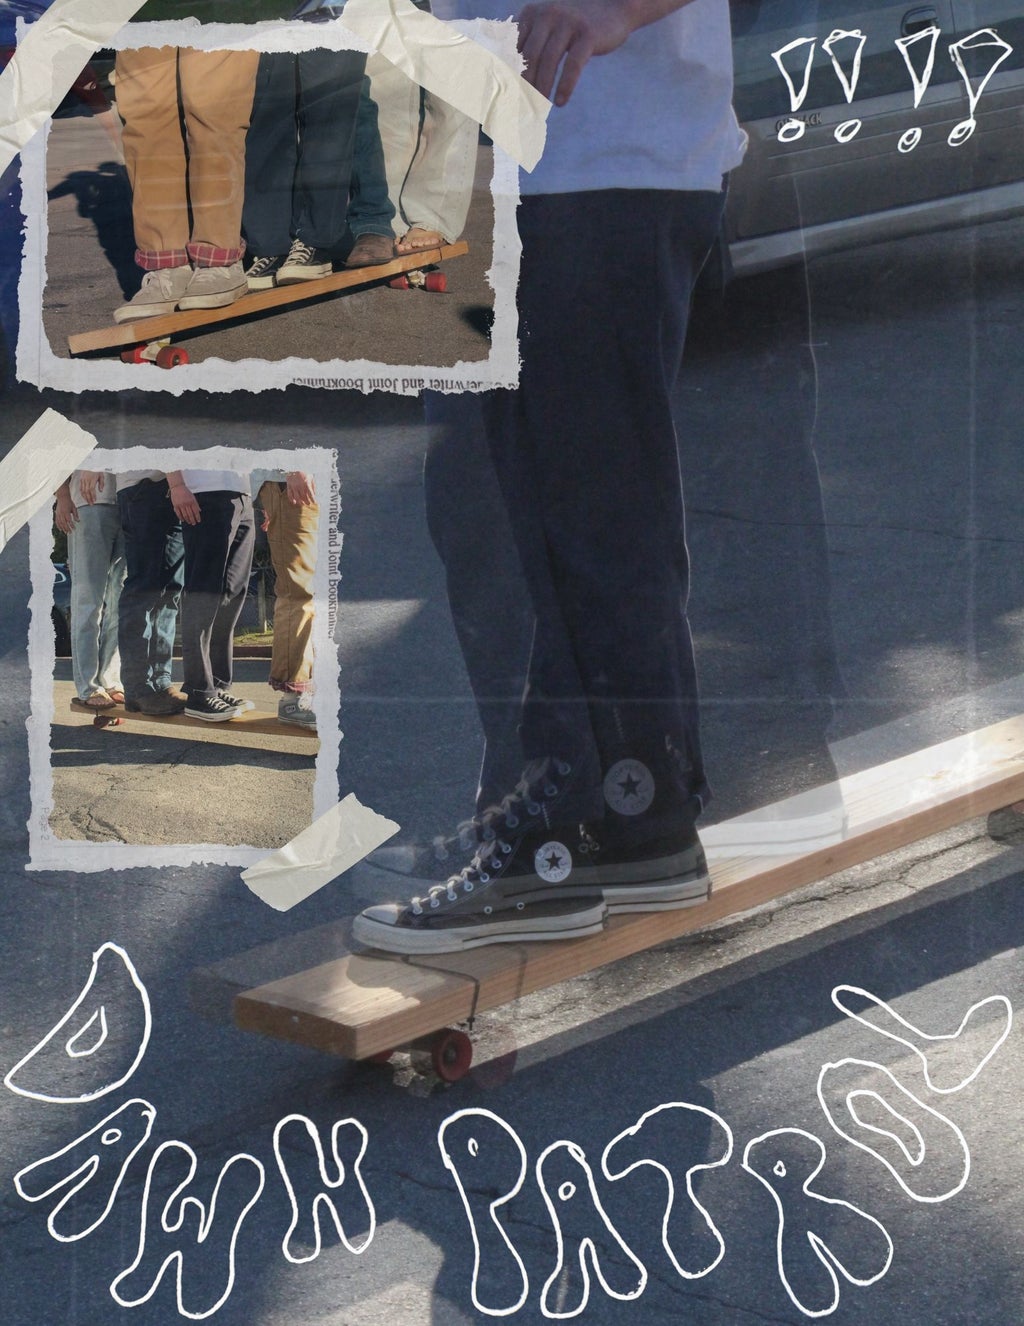 Skateboard image collage with Dawn Patrol written over